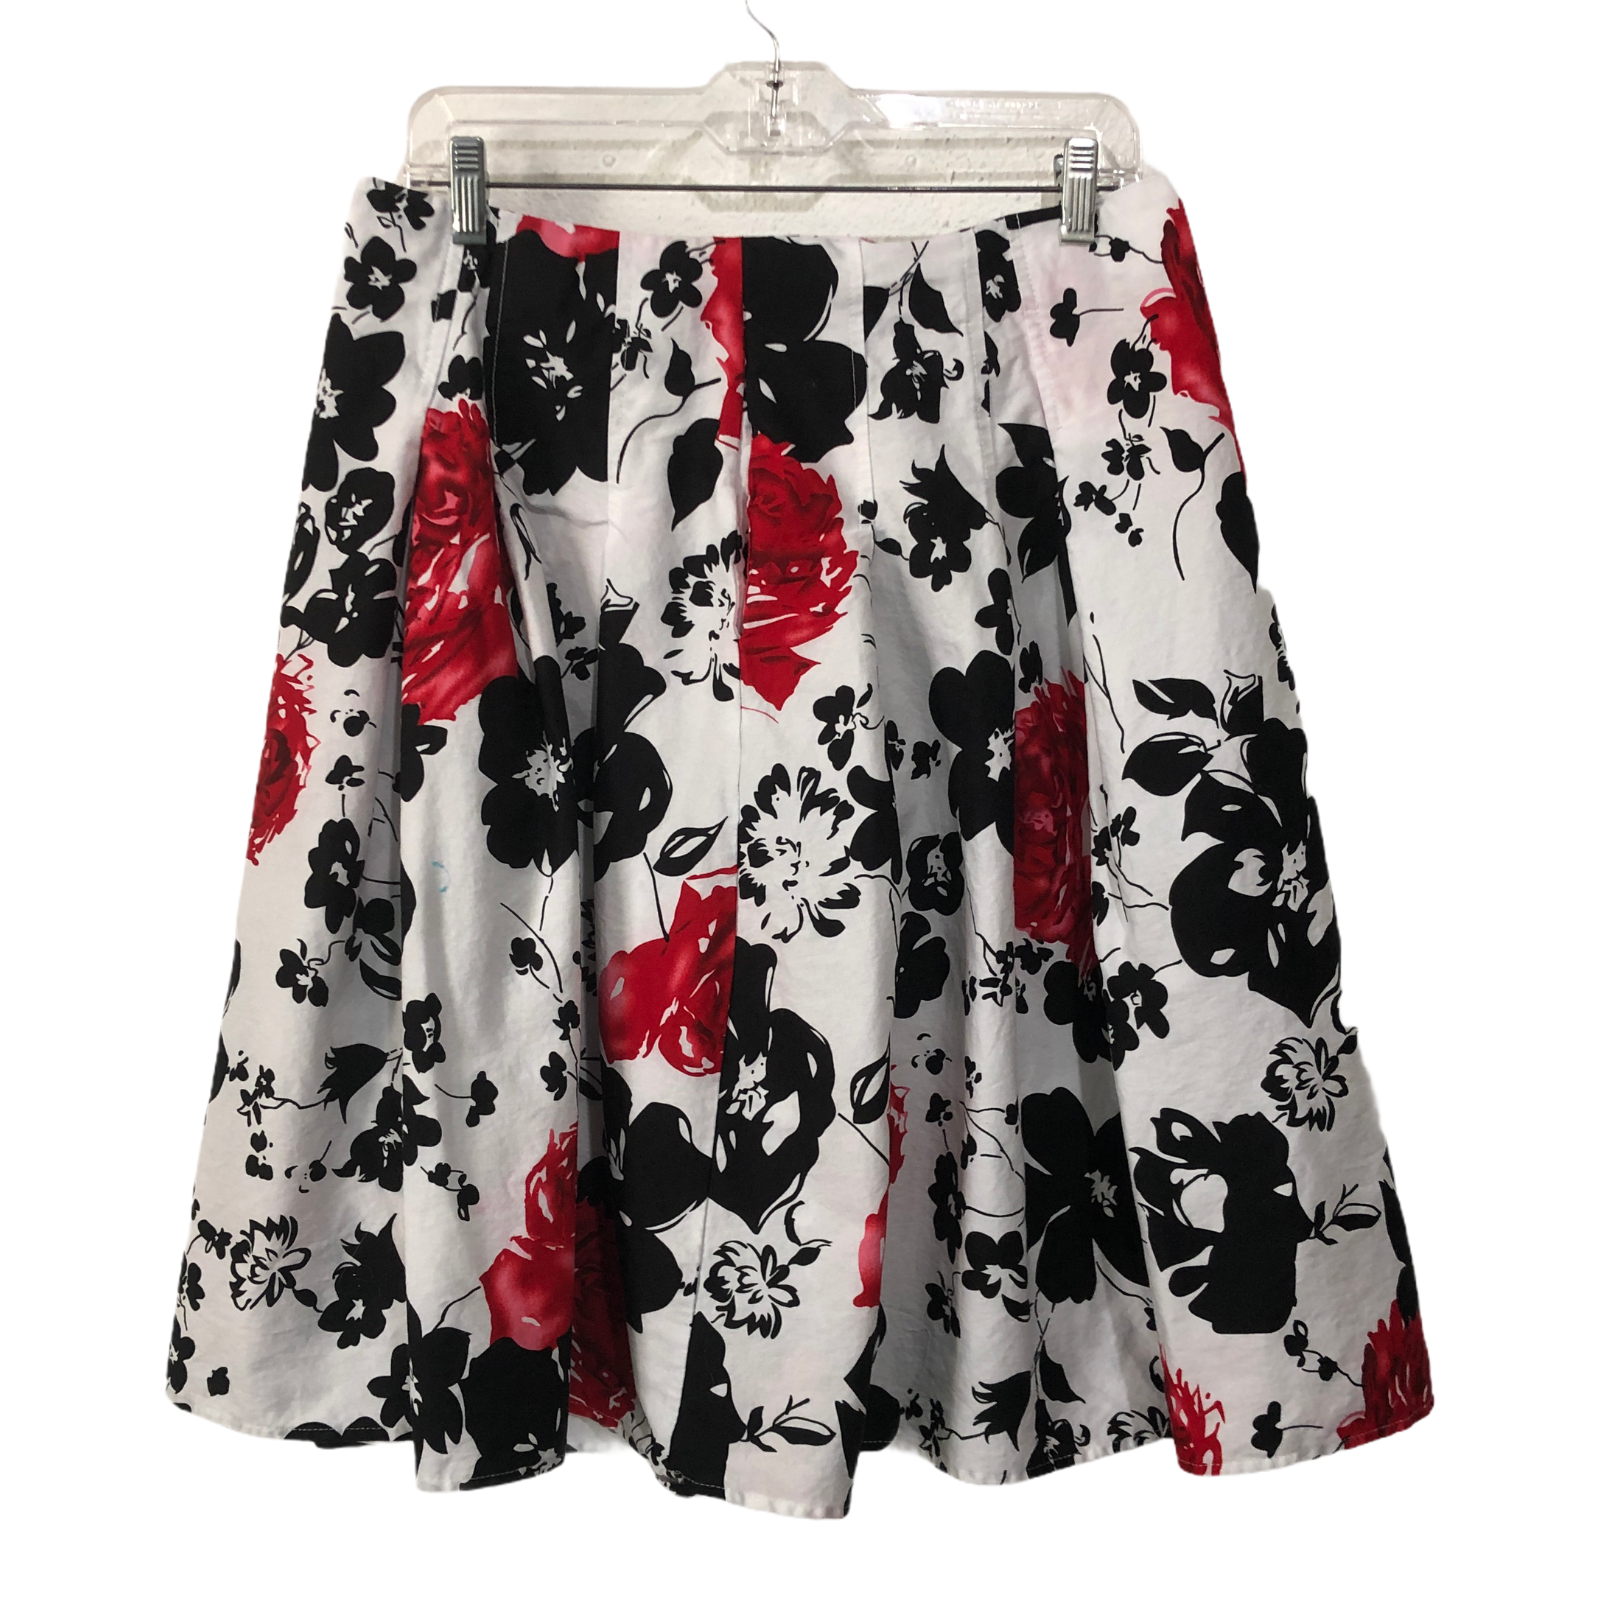 Primary image for Grace Karin Womens Skirt White Black Red Roses Floral Fit Flare Size Large